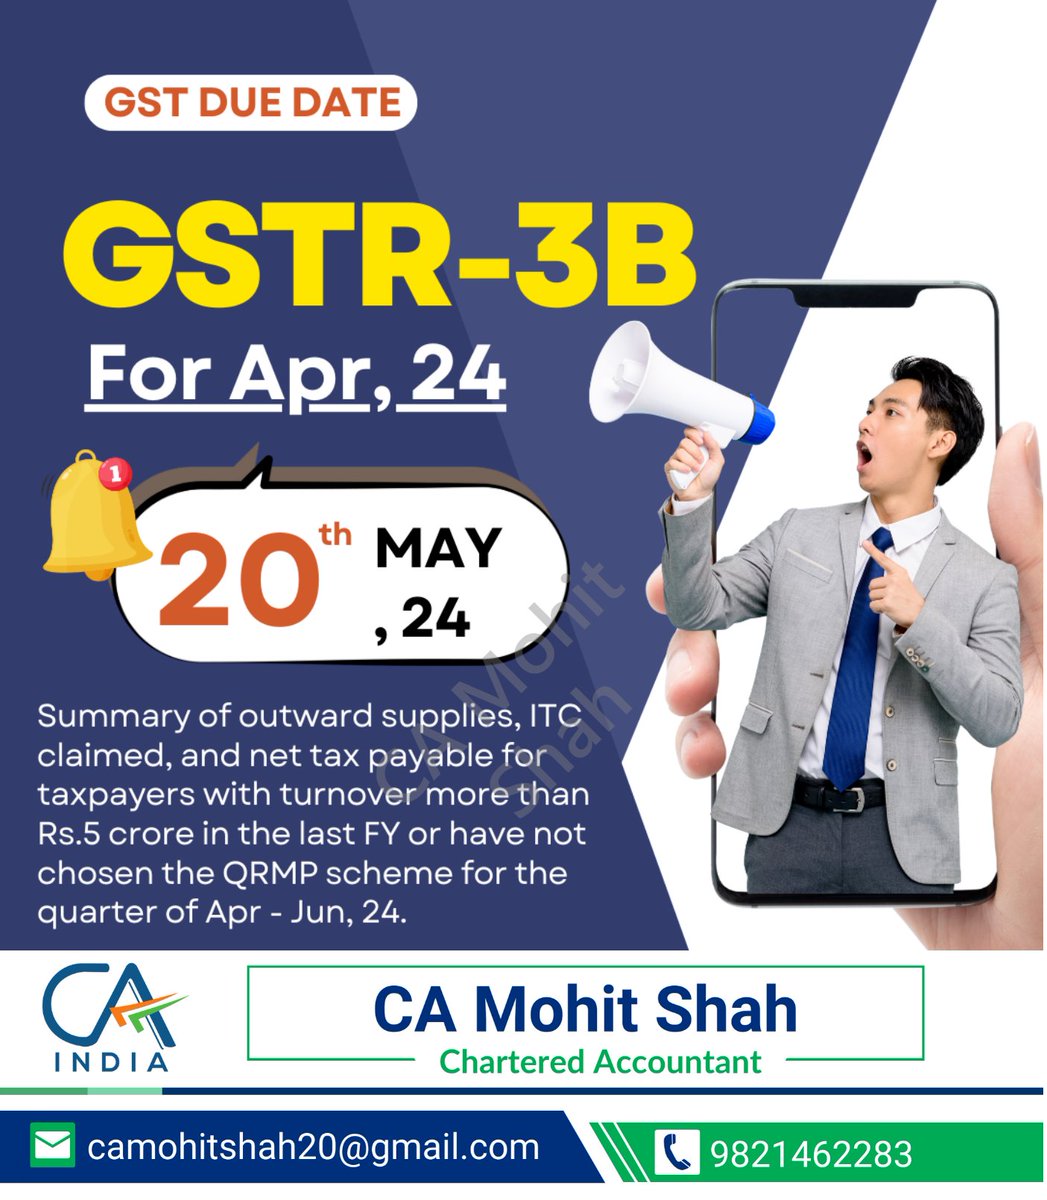 Taxpayers not under QRMP scheme, 20th May,2024 is the last date to file GSTR-3B for April 2024. File now to avoid Late Fees.

#GSTR3B #GSTIndia #TaxFiling #GSTReturn #GSTCompliance #IndianEconomy #FinancialCompliance #TaxUpdates #BusinessTax #CorporateFinance